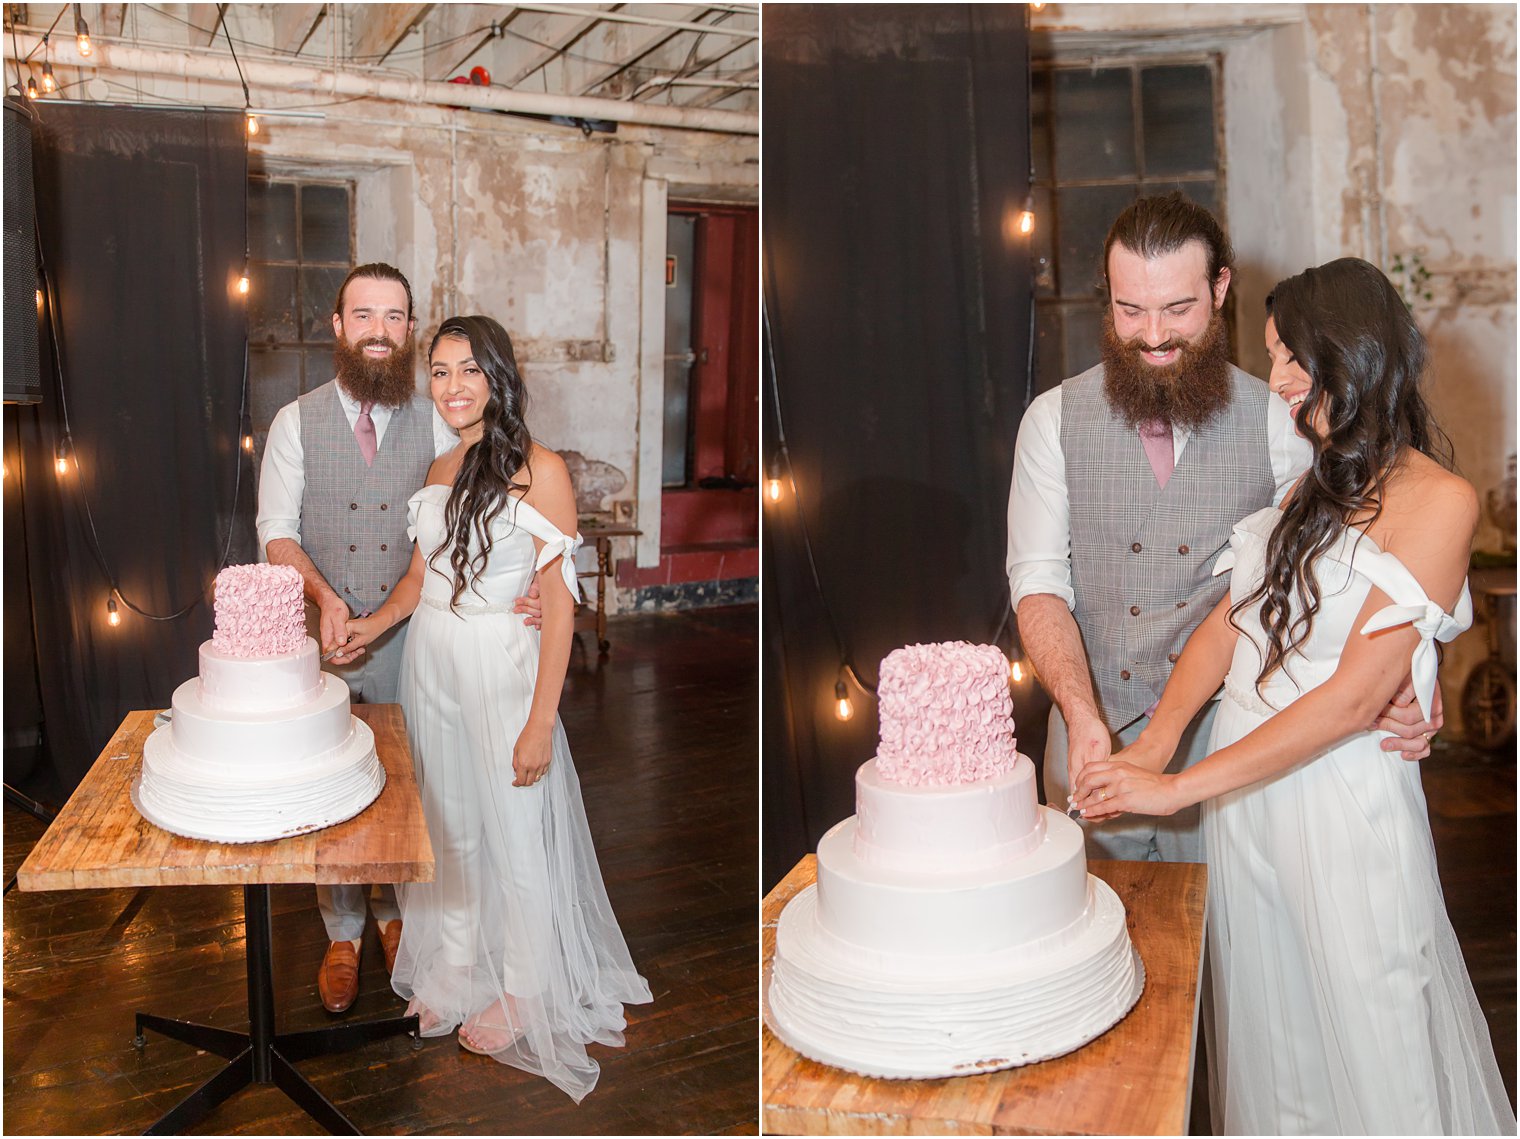 Bride and groom cutting cake at Art Factory Studios in Paterson NJ